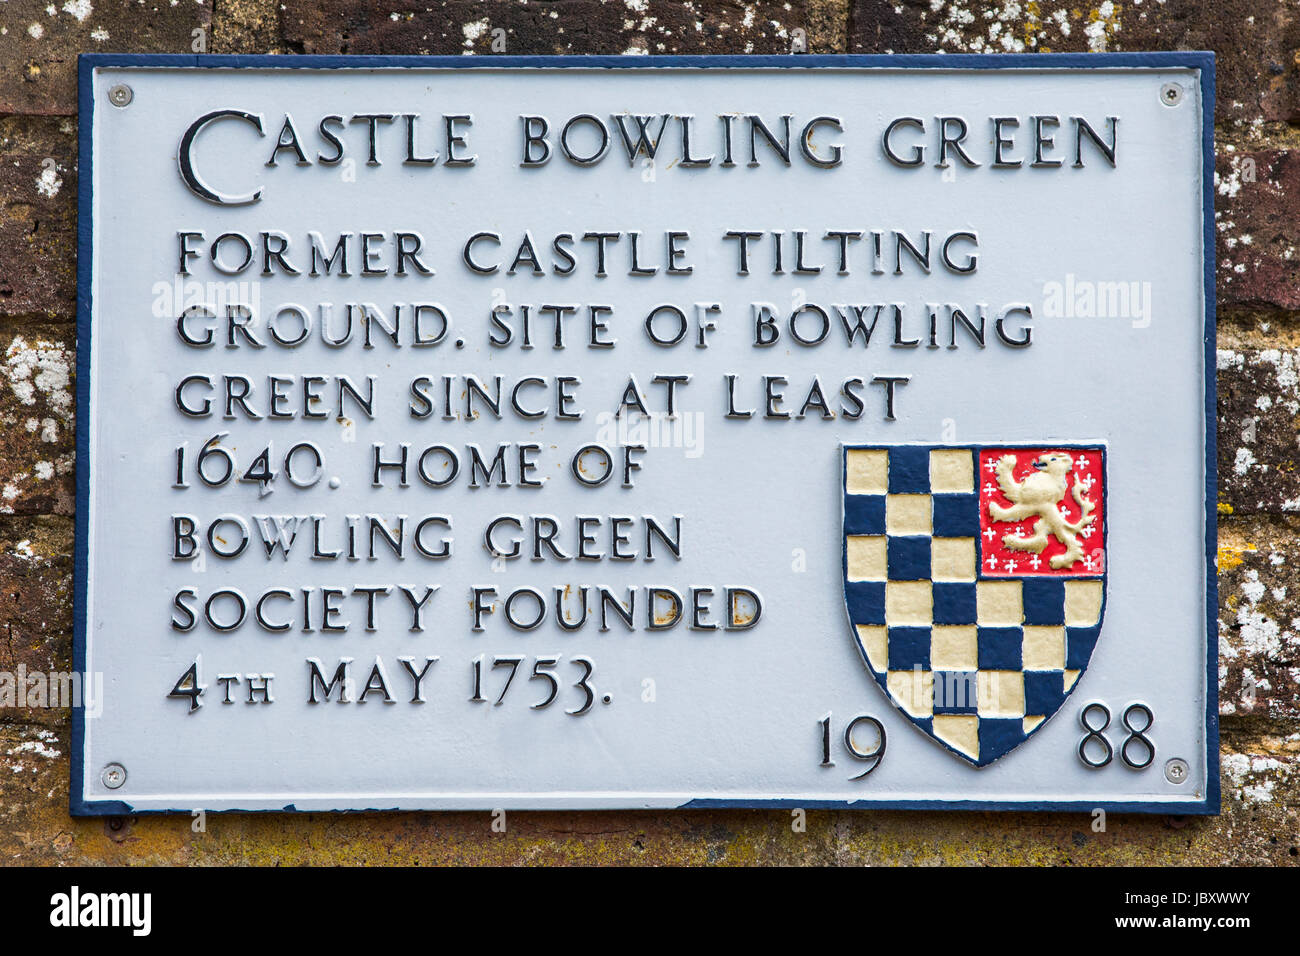 A plaque at Castle Bowling Green in Lewes, detailing the history of the landmark. Stock Photo